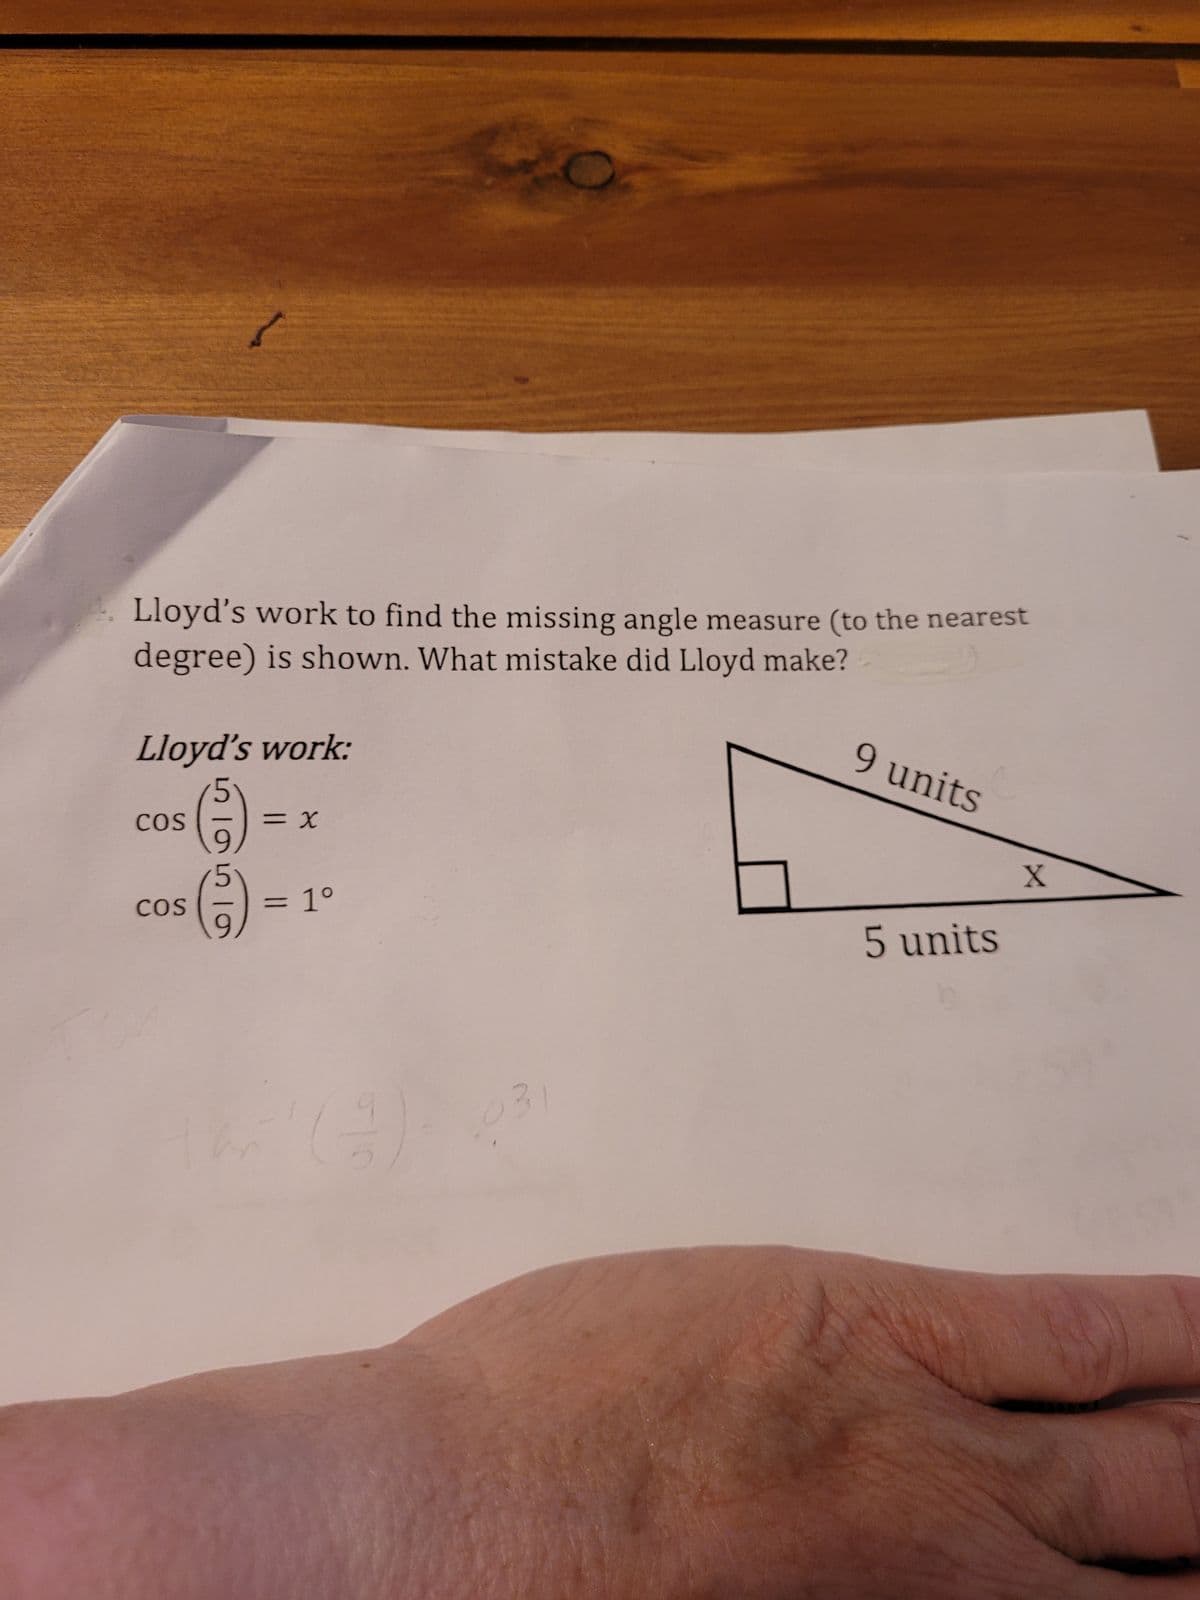 ### Finding the Missing Angle of a Right Triangle (Example Problem)

Lloyd's attempt to find the missing angle measure (to the nearest degree) is shown. Review his work and identify the mistake he made.

#### Lloyd's Work:
```
cos (5/9) = x
  cos (5/9) = 1°
```

#### Diagram:
We are given a right triangle where:
- The hypotenuse is 9 units.
- The adjacent side to the angle \( x \) is 5 units.

#### Analysis:
Lloyd is attempting to use the cosine function, which is defined as:
\[ \cos(\theta) = \frac{\text{adjacent}}{\text{hypotenuse}} \]

Given:
\[ \cos(x) = \frac{5}{9} \]

The correct method to find the angle \( x \) is to use the inverse cosine (arccos) function:
\[ x = \cos^{-1}\left(\frac{5}{9}\right) \]

#### Mistake Identified:
Lloyd did not actually use the inverse cosine function (cosine inverse or arccos). Instead, he incorrectly interpreted \( \cos (5/9) \) as an angle measure, which is not mathematically appropriate.

Moreover, cosine values must always be between -1 and 1, and thus the cosine of a ratio like 5/9 should not yield an angle directly.

#### Corrected Work:
Apply the inverse cosine to find the angle \( x \):
\[ x = \cos^{-1}\left(\frac{5}{9}\right) \]

Using a calculator:
\[ x \approx \cos^{-1}(0.5556) \approx 56 \text{ degrees} \]

#### Conclusion:
Lloyd's mistake was not applying the inverse cosine function to find the angle. The correct measure of angle \( x \) is approximately 56 degrees.